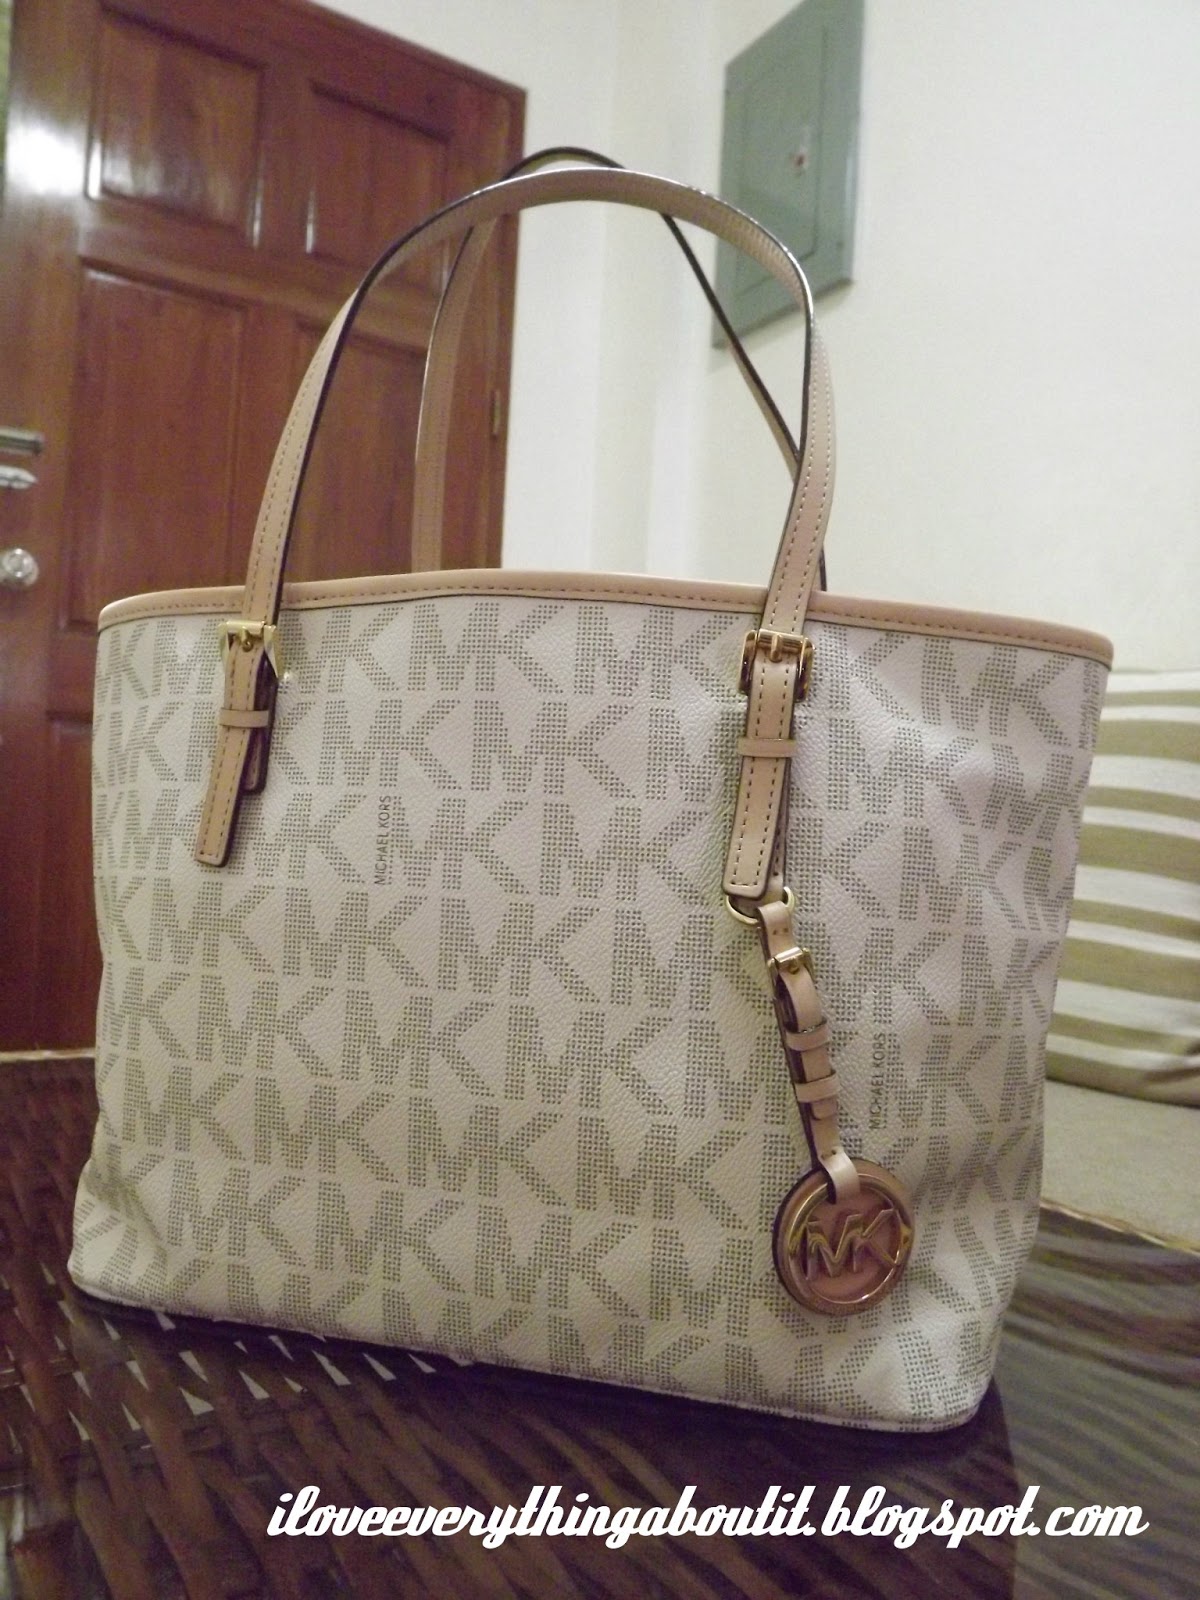 how to check michael kors bag authenticity